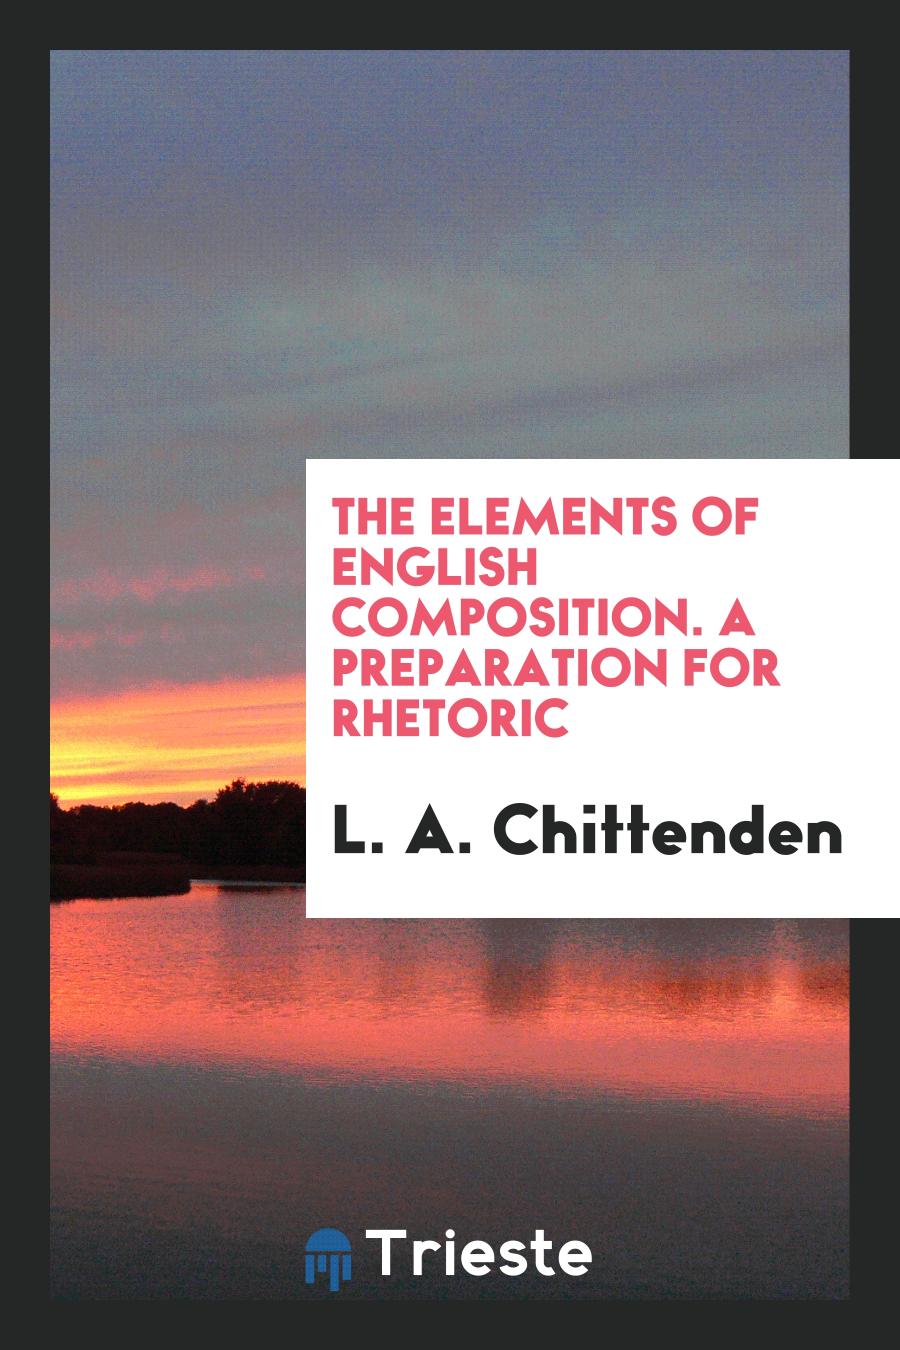 The Elements of English Composition. A Preparation for Rhetoric